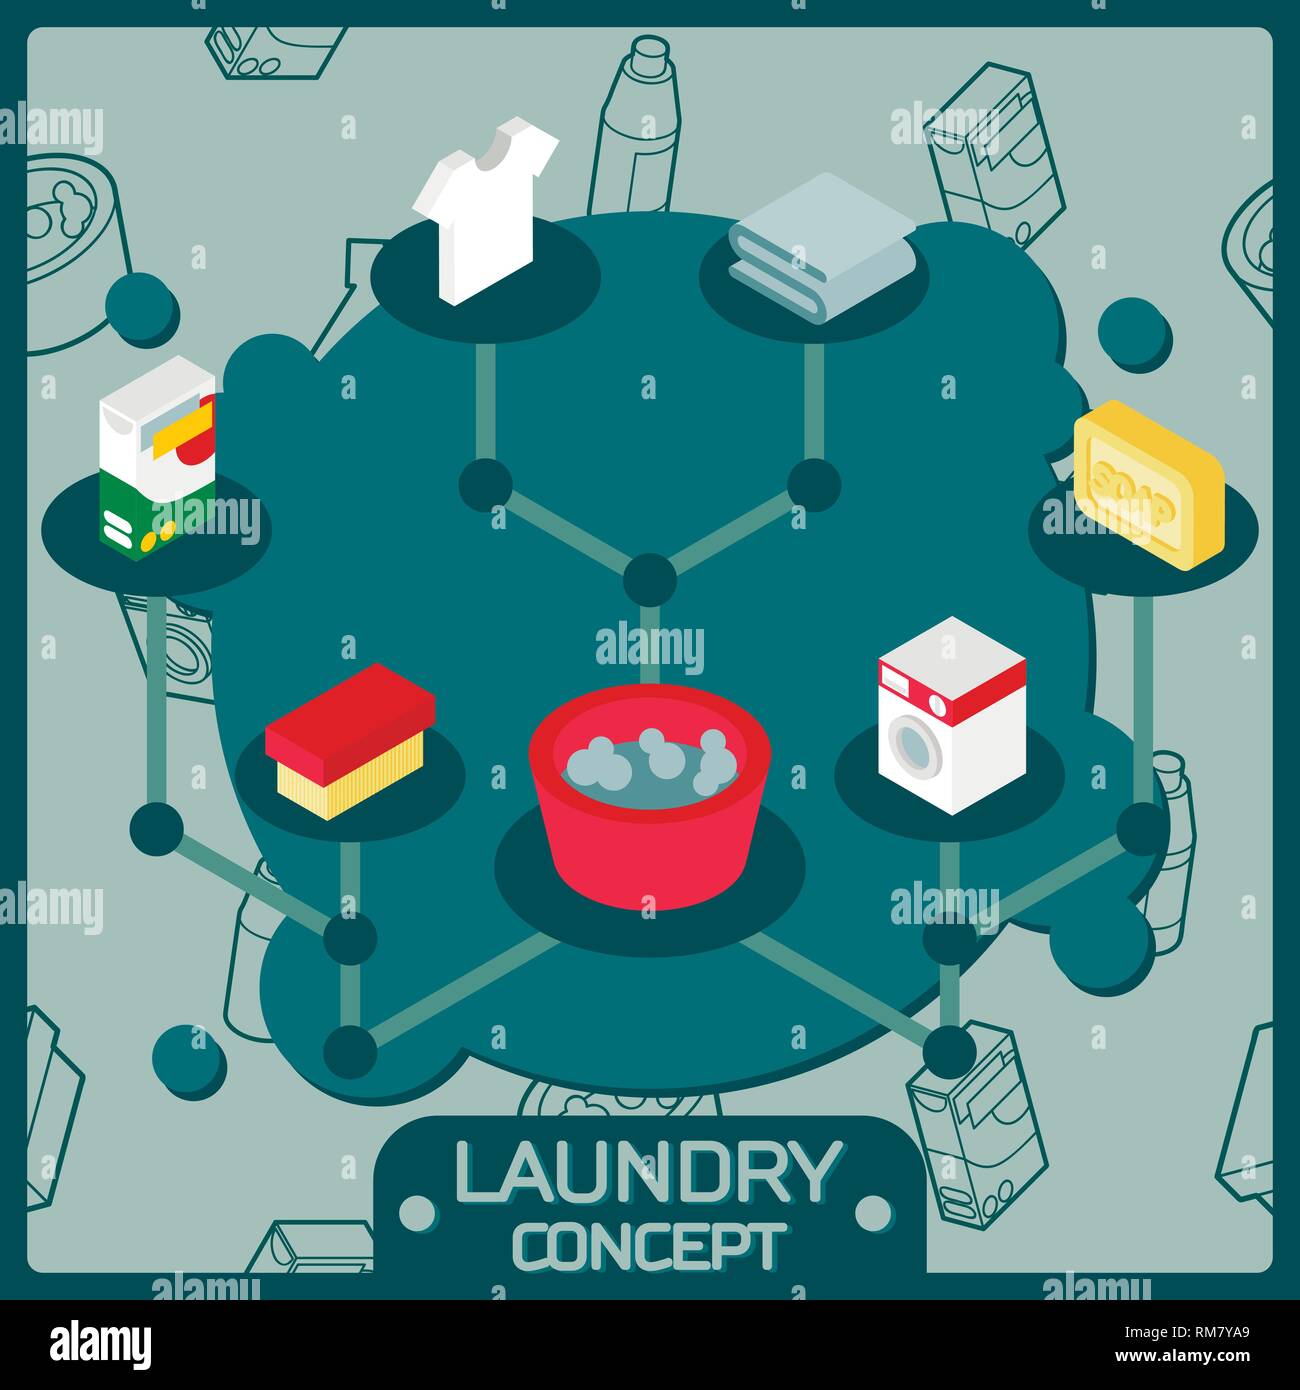 Laundry color isometric concept icons. Vector illustration, EPS 10 Stock Vector